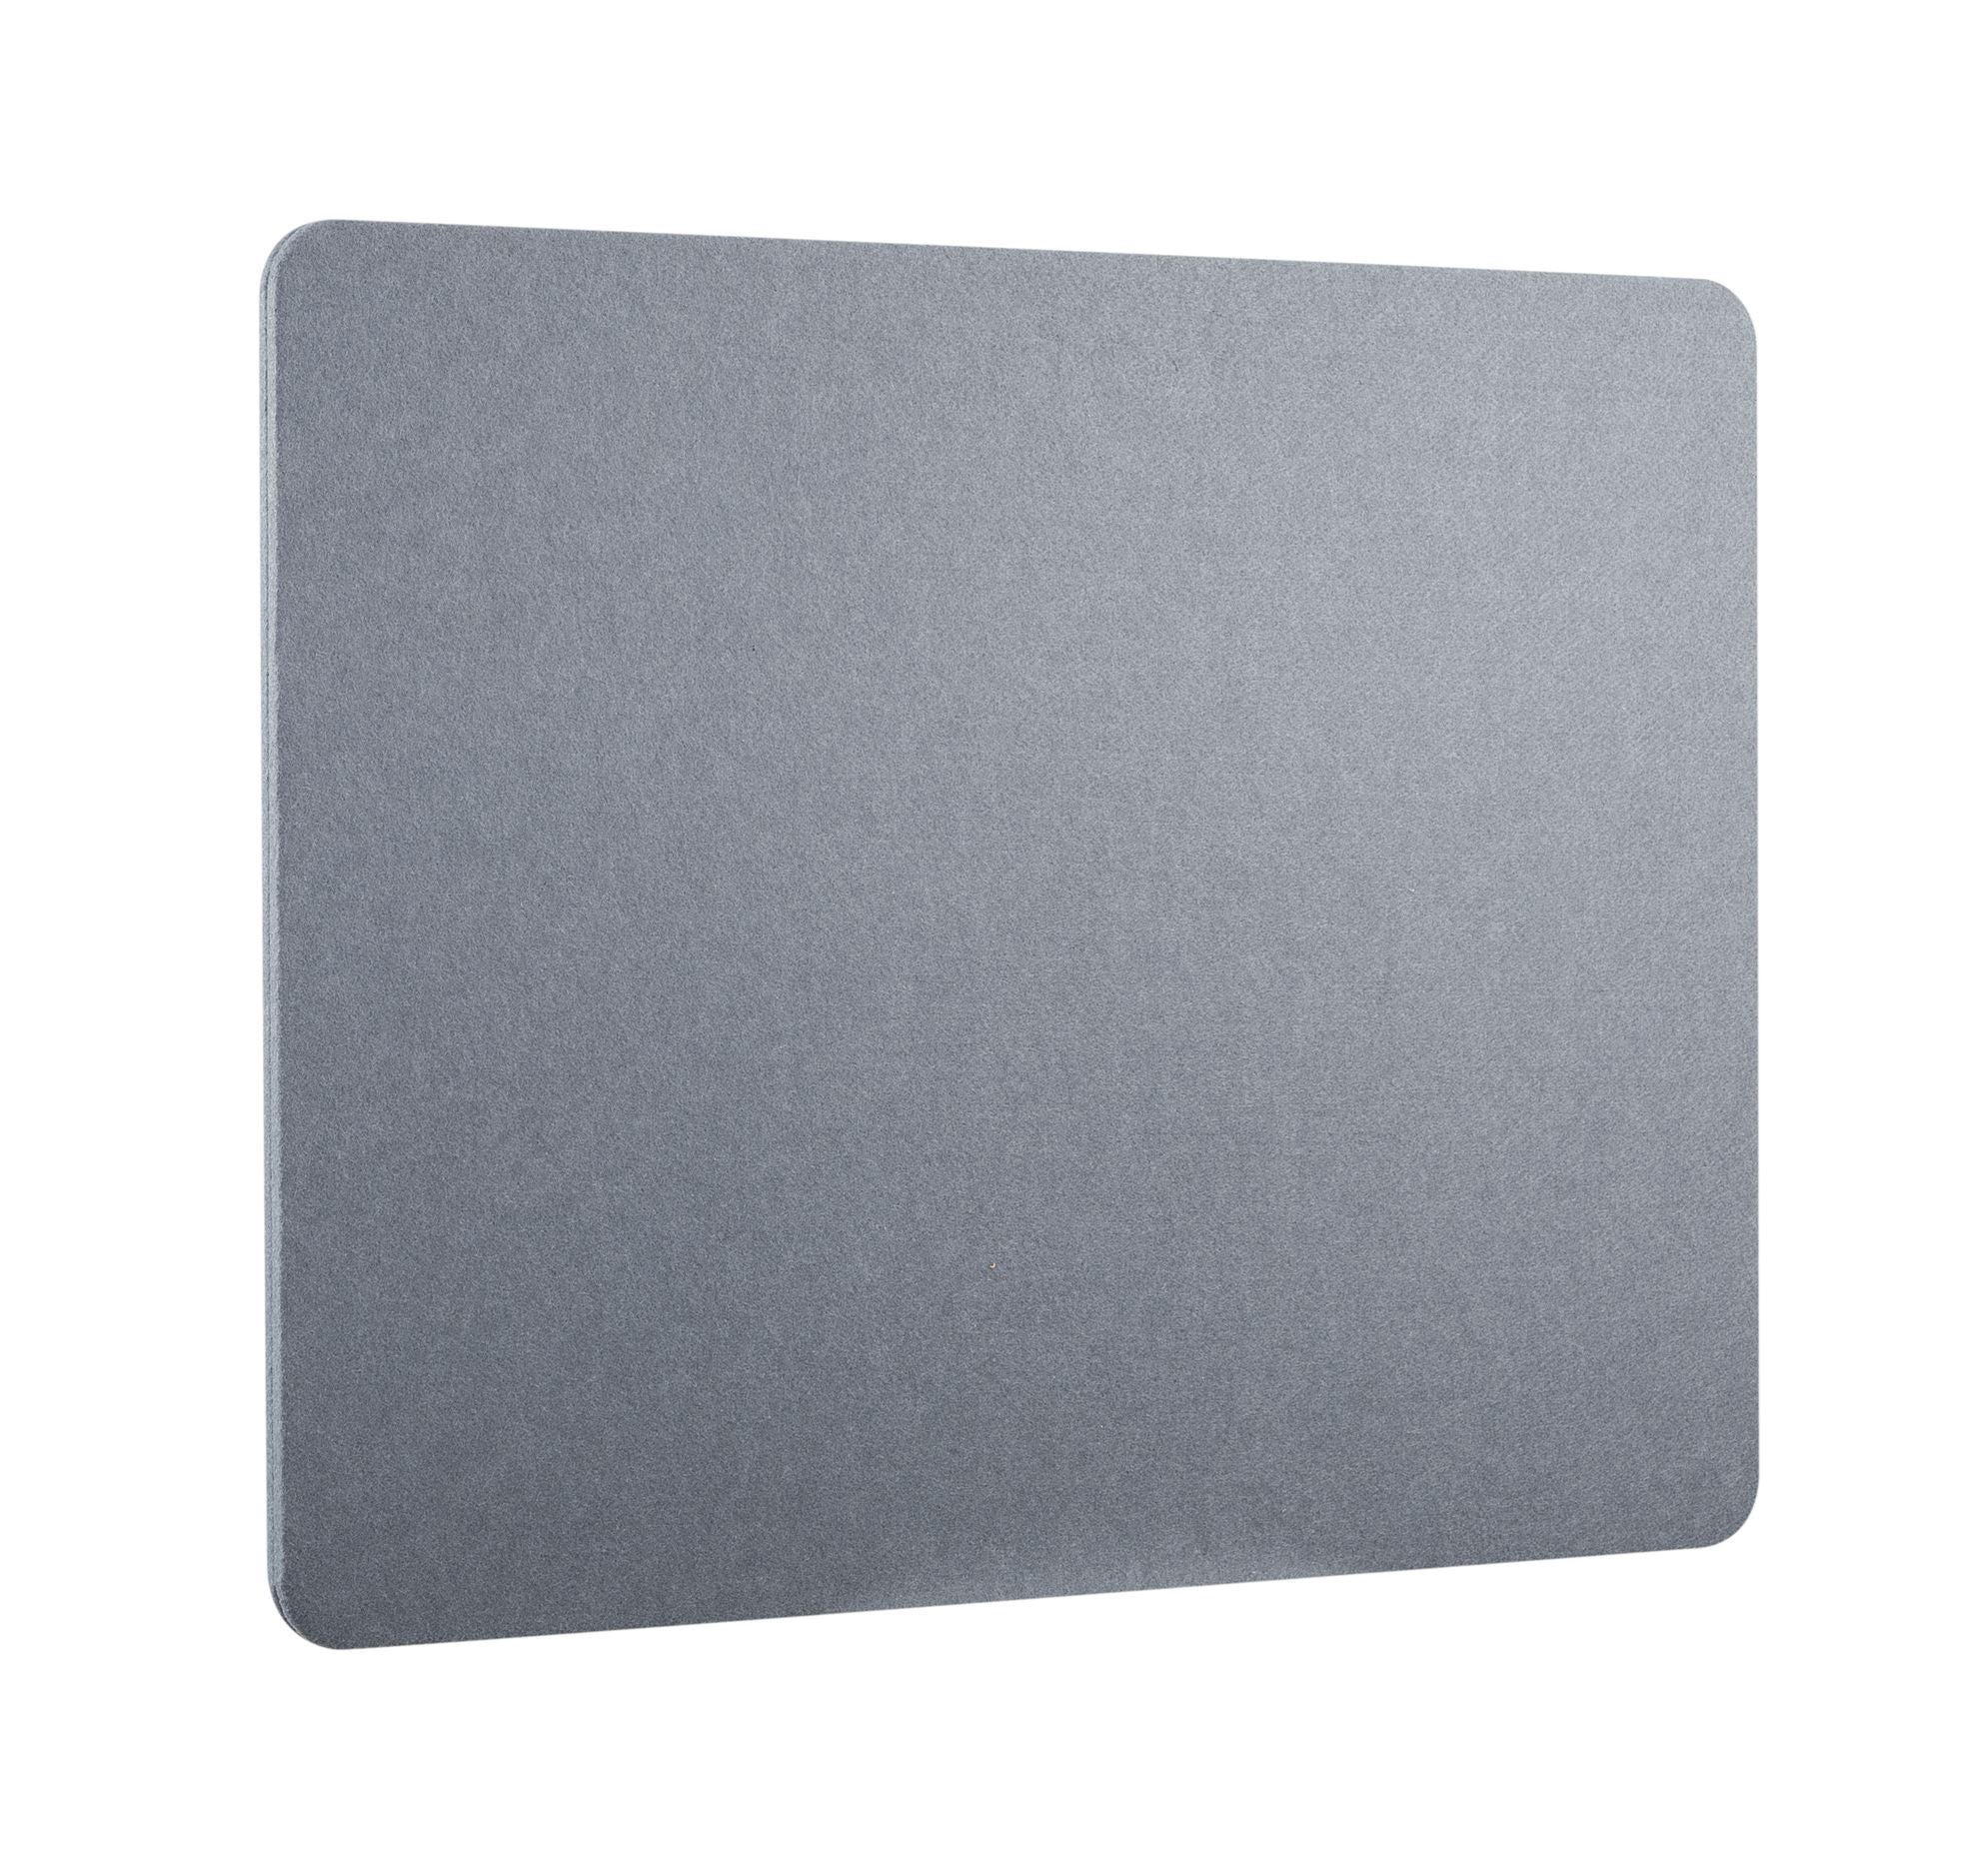 BRATECK_.75m_Desktop_Privacy_Panel_with_2x_Heavy-Duty_Clamp._Felt_Surface_to_Reduce_Office_Noise._Screen_Dims_750x600x20mm._Grey_Colour._Pair_with_TP18075_or_TP18075L